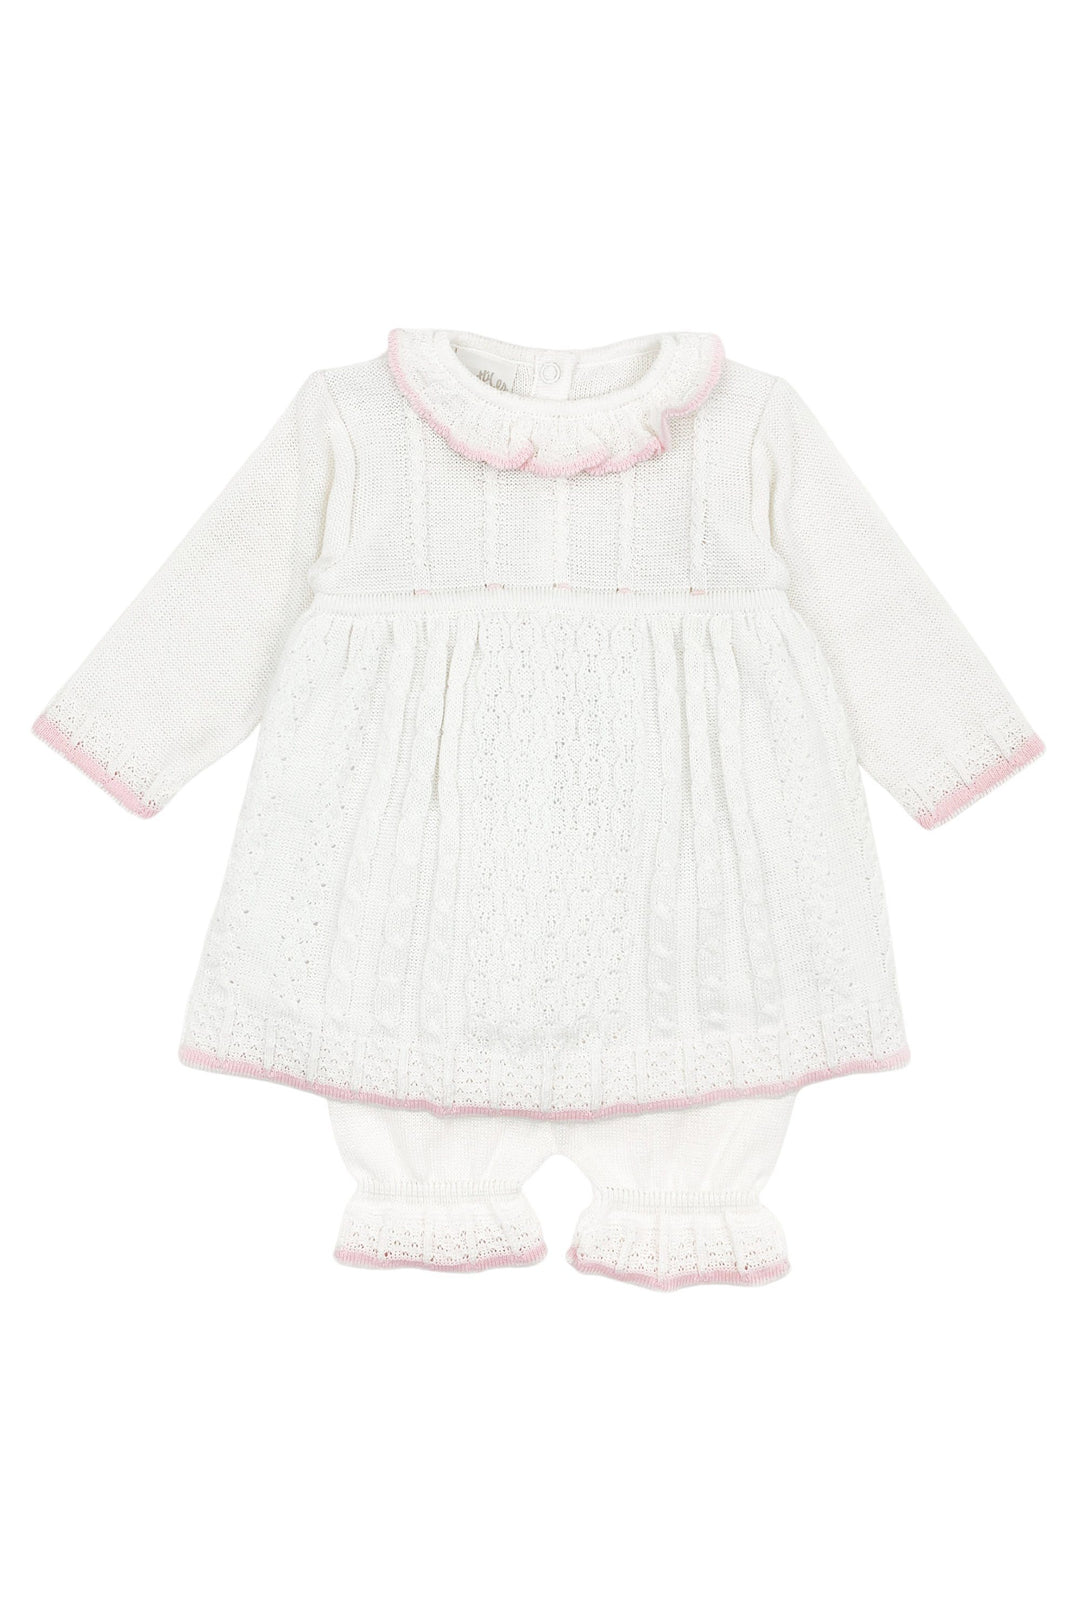 Pretty Originals "Cristina" Ivory Knitted Dress & Bloomers | Millie and John